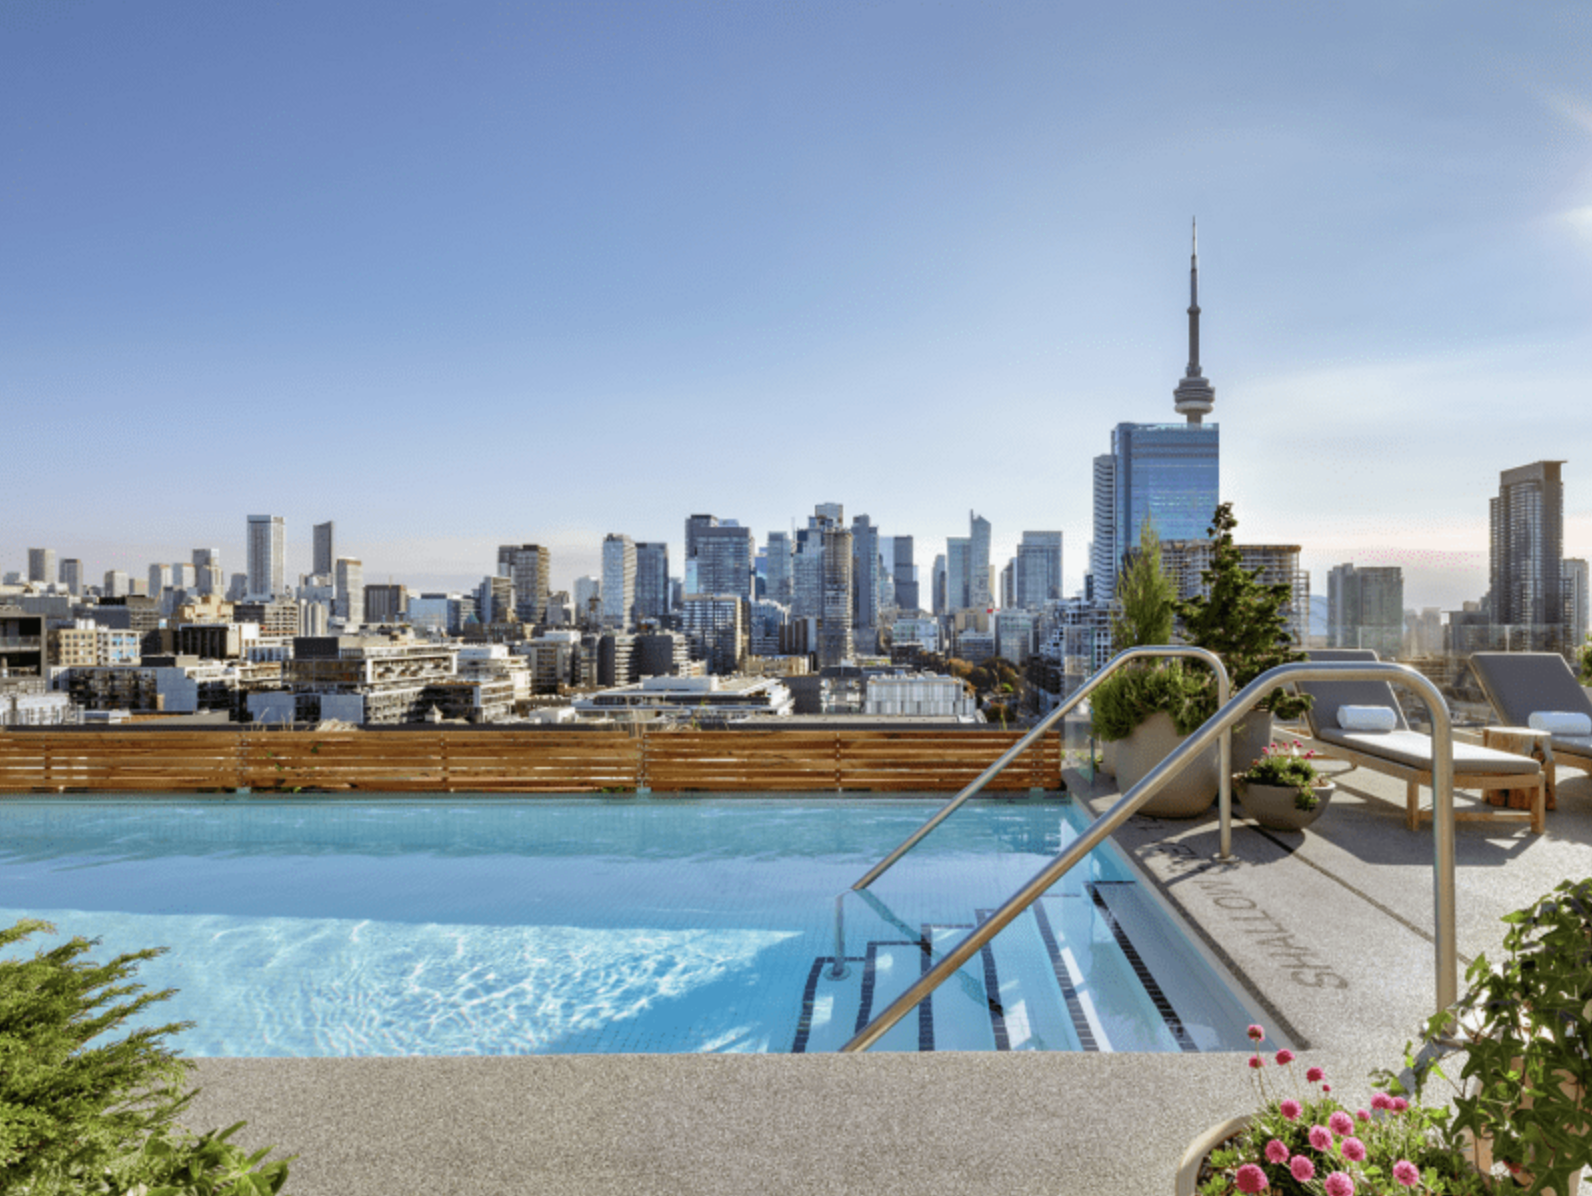 3. 1 Hotel Toronto - Best Hotels in Toronto with Rooftop Pools